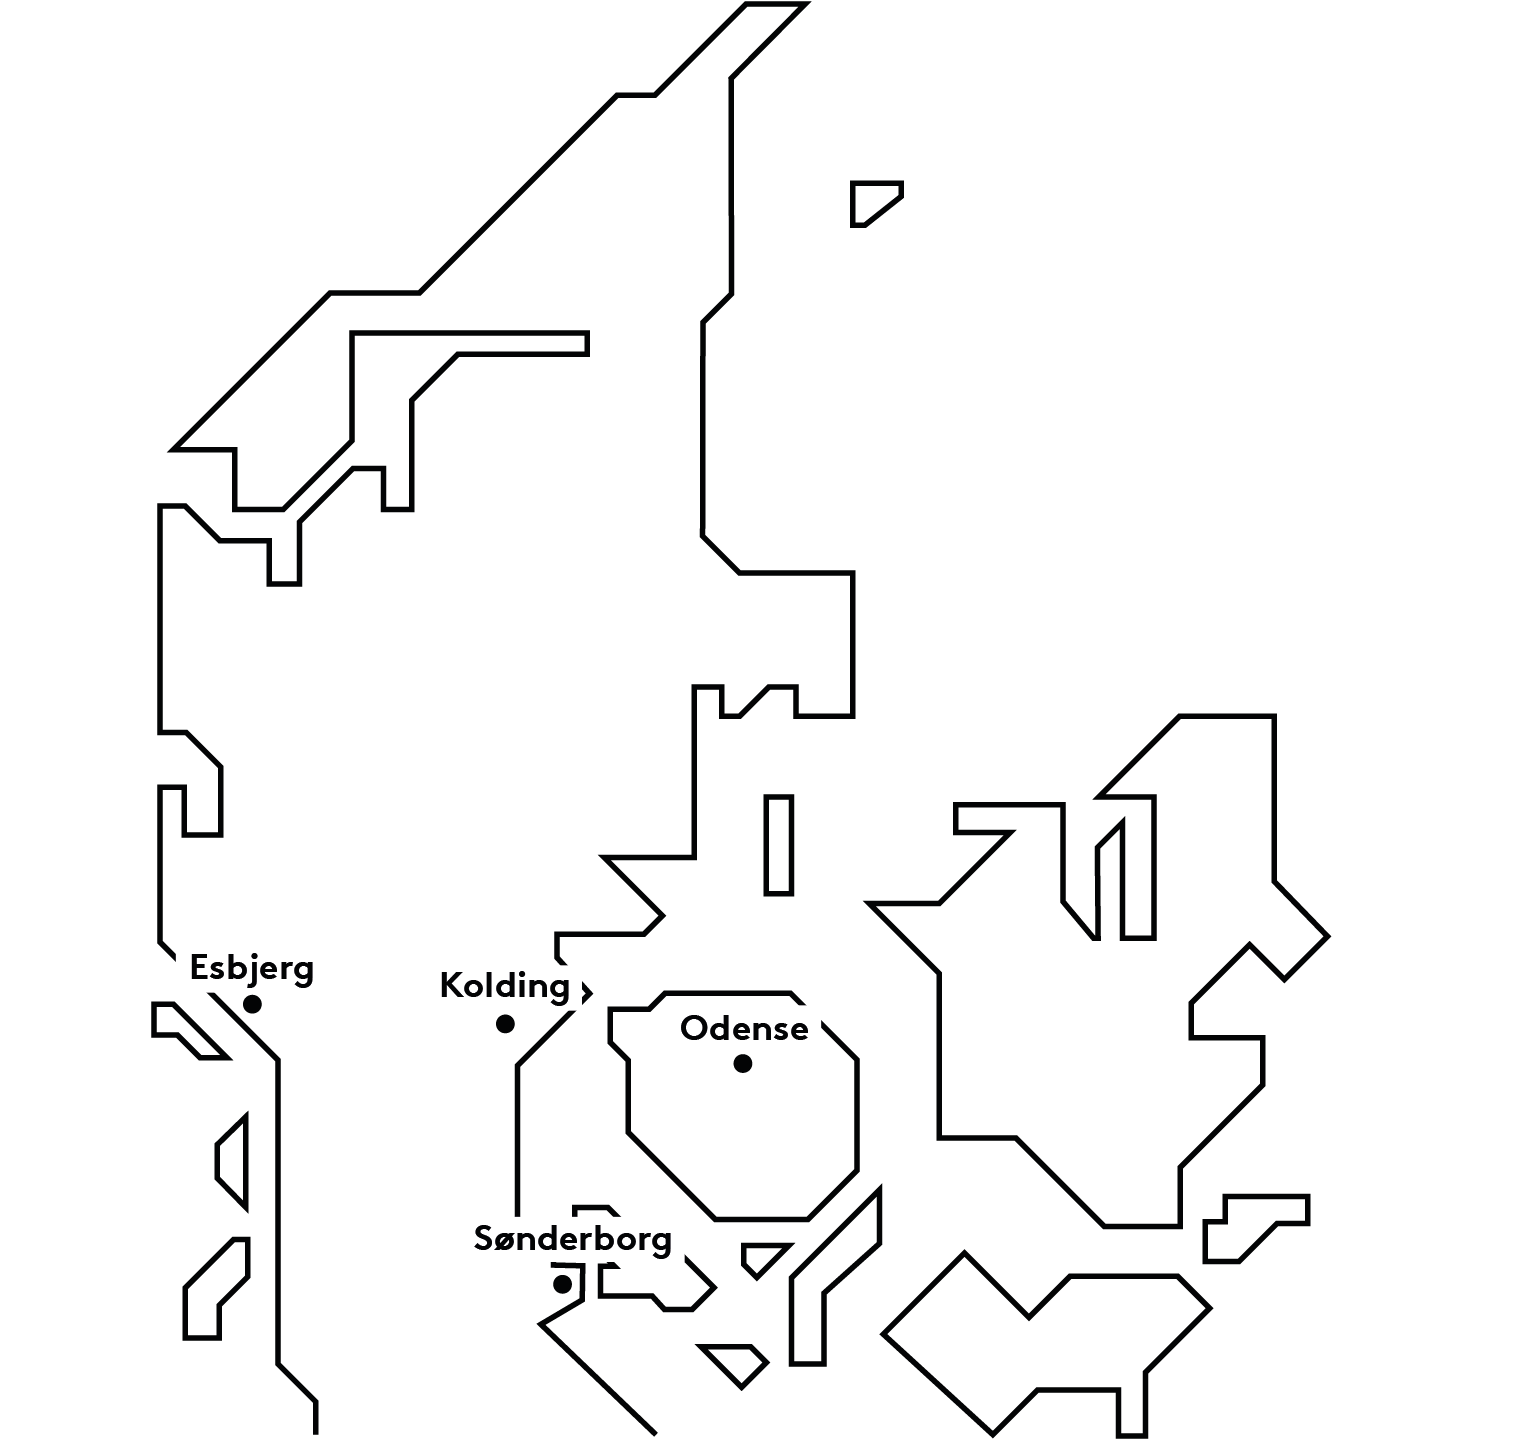 Map over Denmark with the locations of SDU's campuses marked in Esbjerg, Kolding, Sønderborg, and Odense